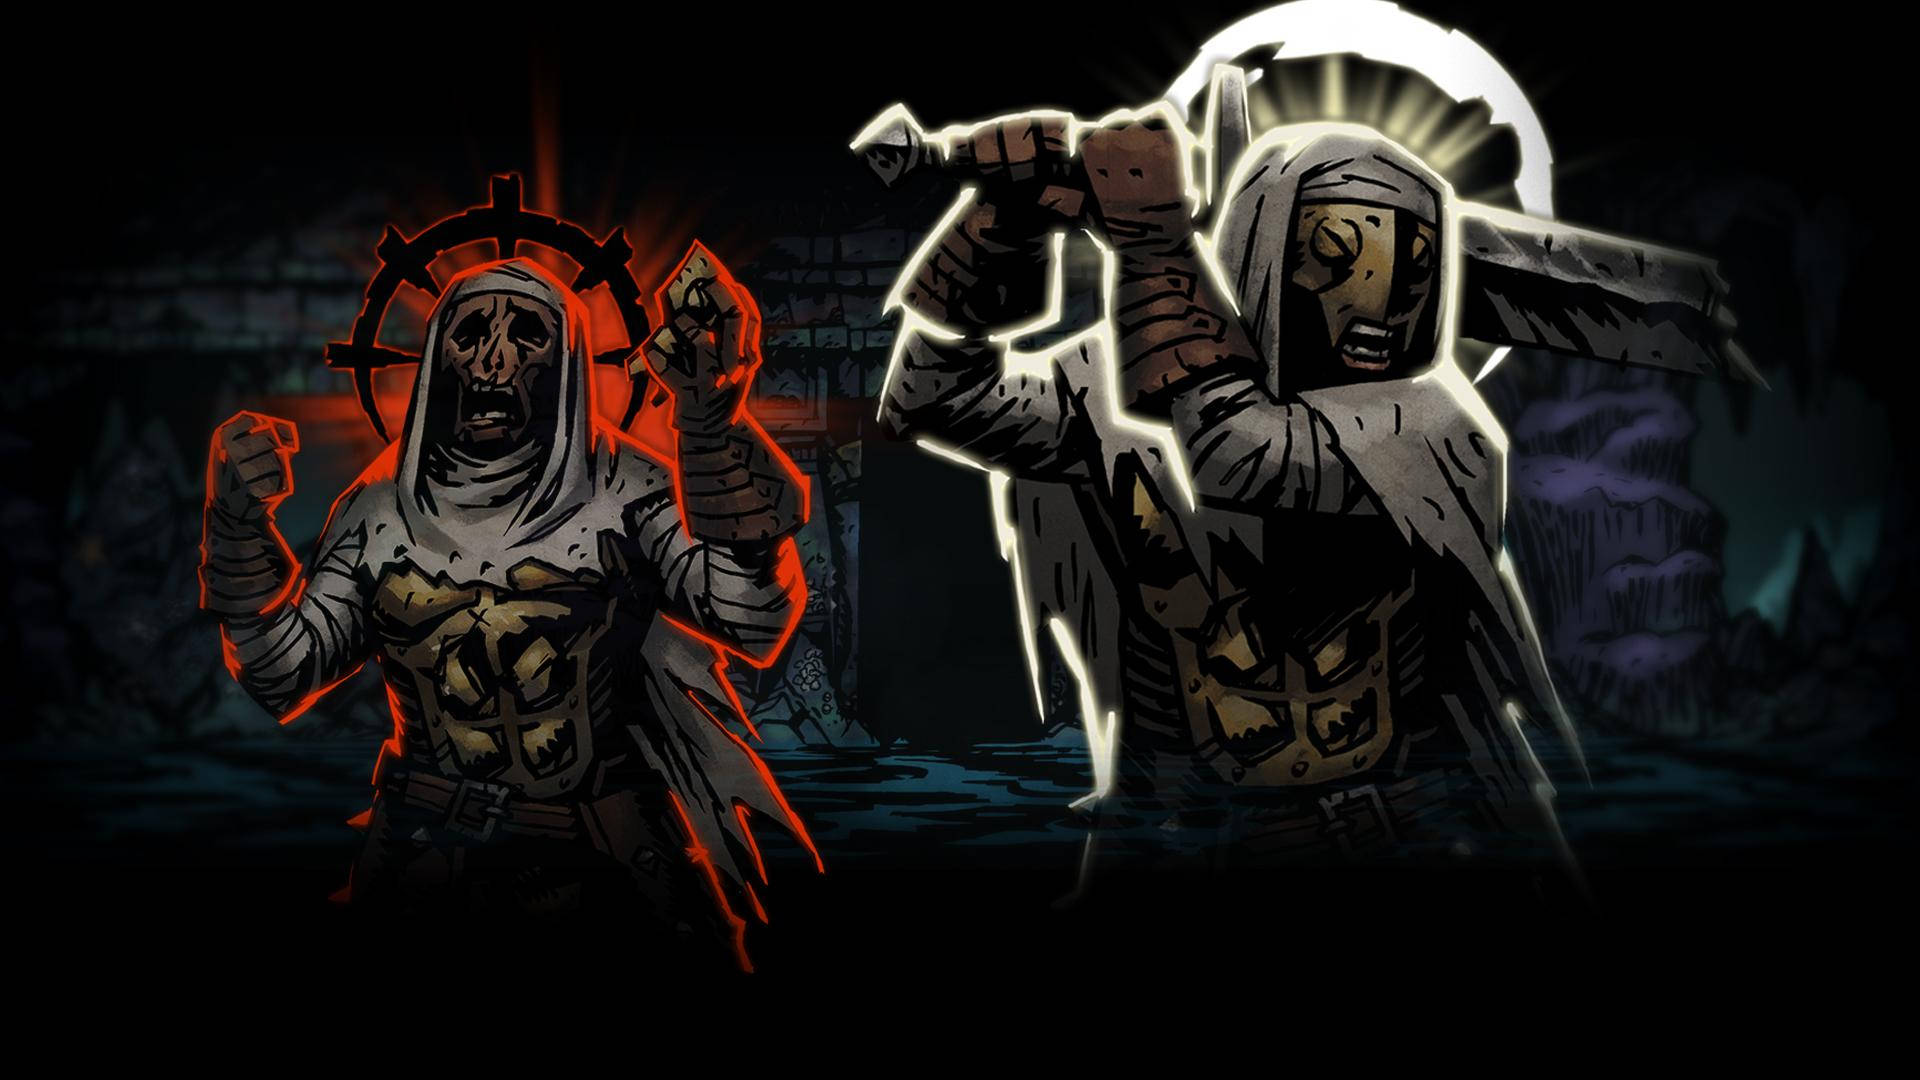 Face your fear! The Leper is here to give you a fright! Wallpaper